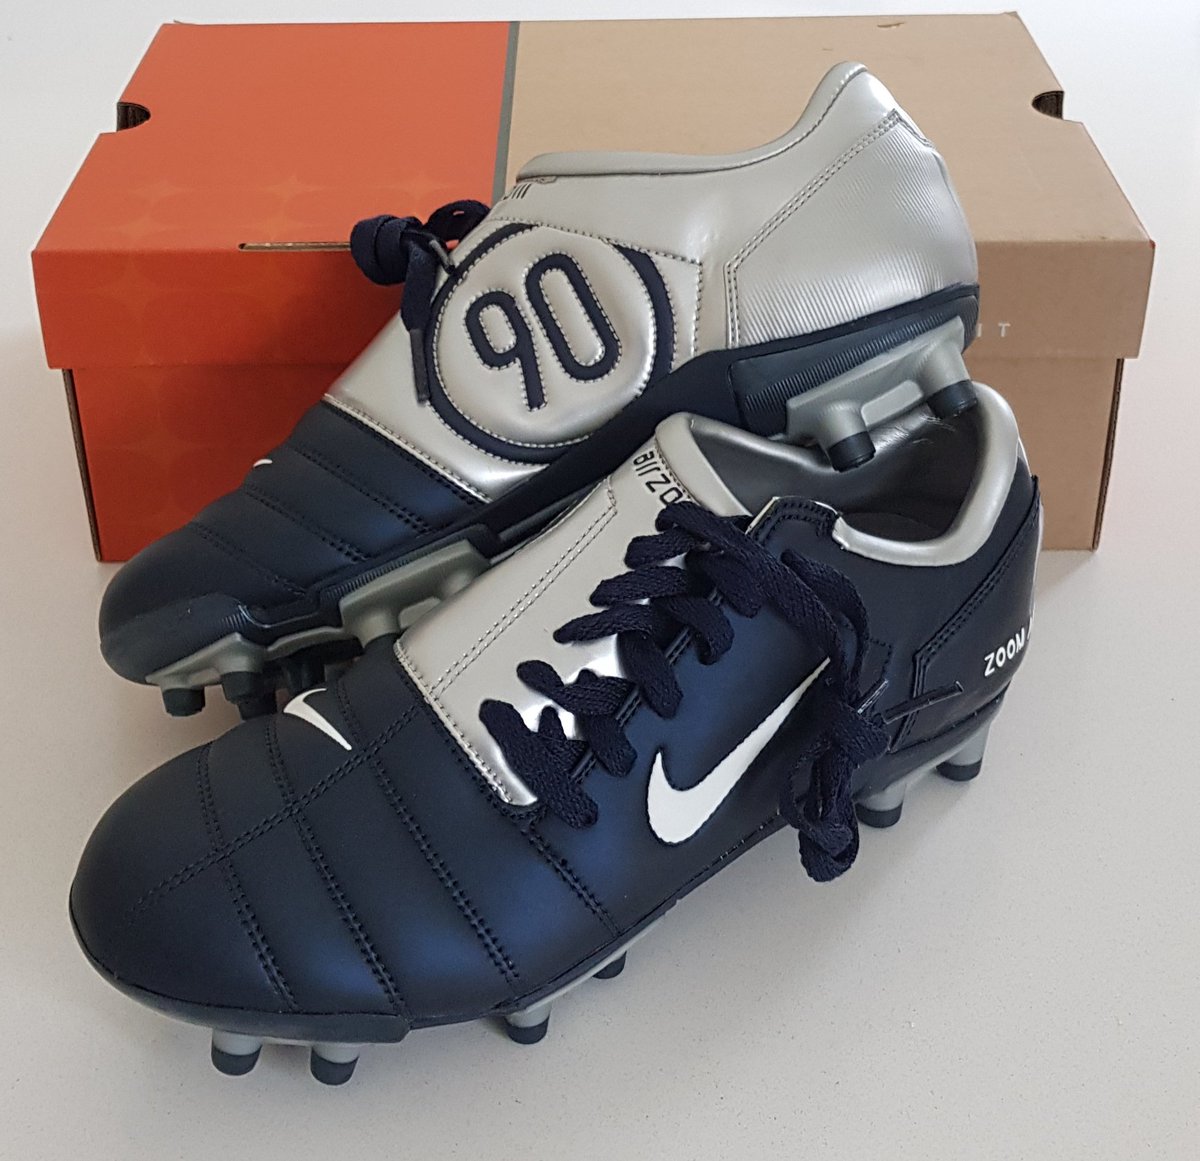 nike 90s football boots